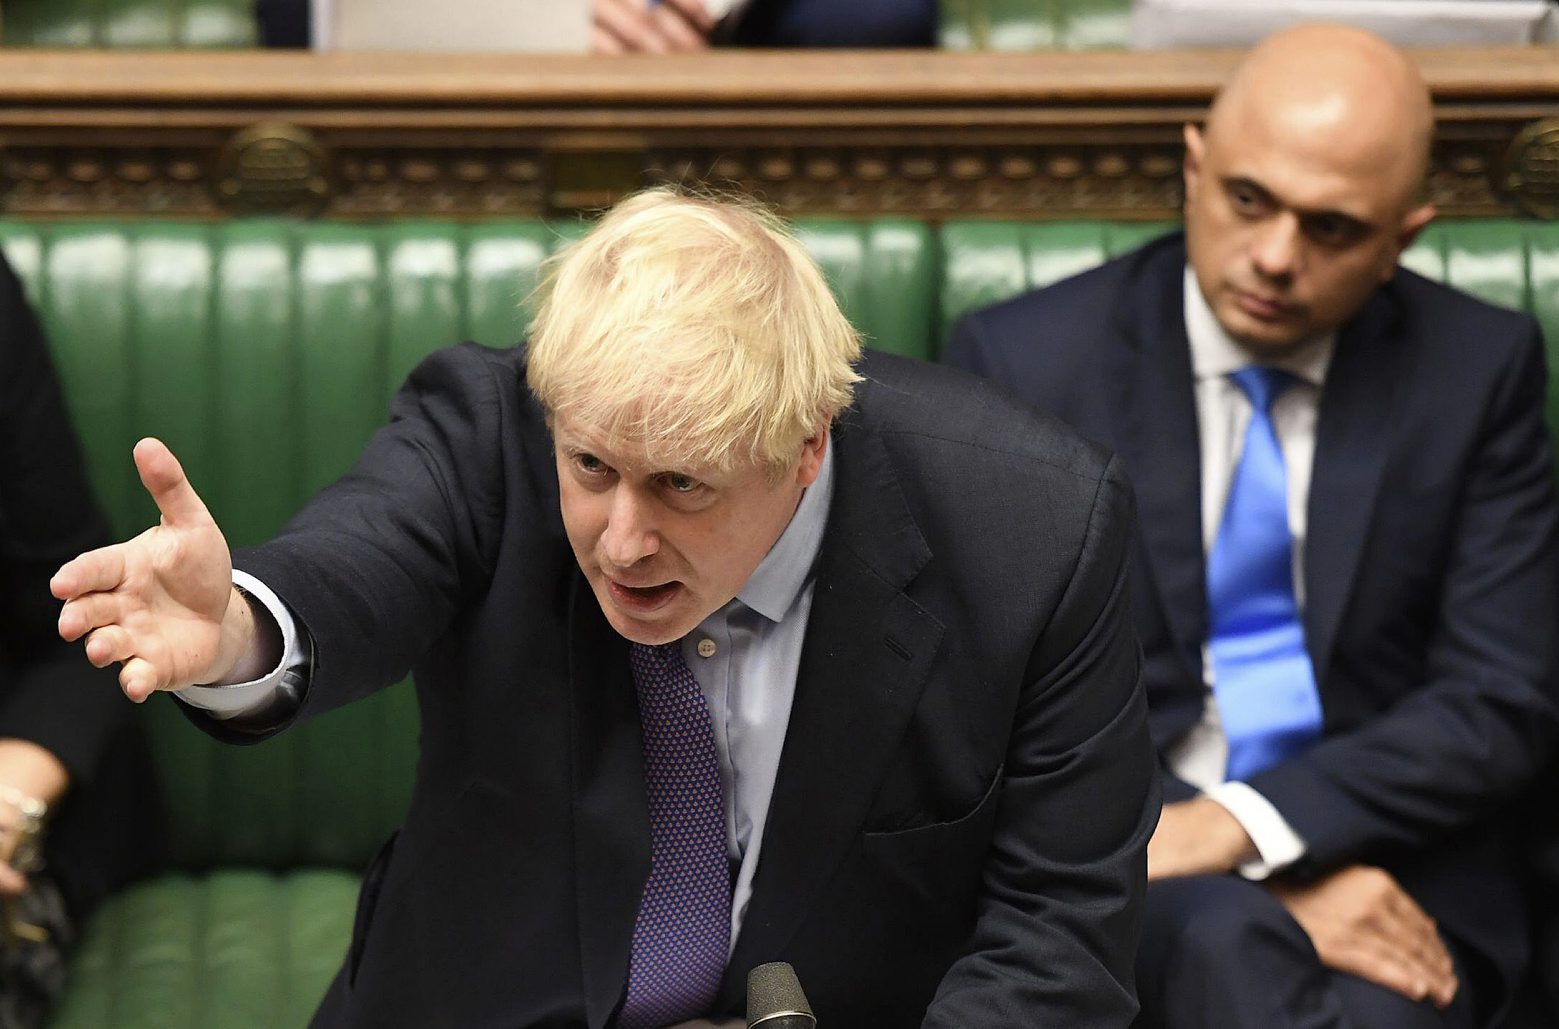 Britain's Prime Minister Boris Johnson gestures as he speaks in the House of Commons in London during the debate for the EU Withdrawal Agreement Bill, Tuesday Oct. 22, 2019. British lawmakers have rejected the governmentÄôs fast-track attempt to pass its Brexit bill within days, demanding more time to scrutinize the complex legislation and throwing Prime Minister Boris JohnsonÄôs exit timetable into chaos. (Jessica Taylor, UK Parliament via AP) APTOPIX Britain Brexit